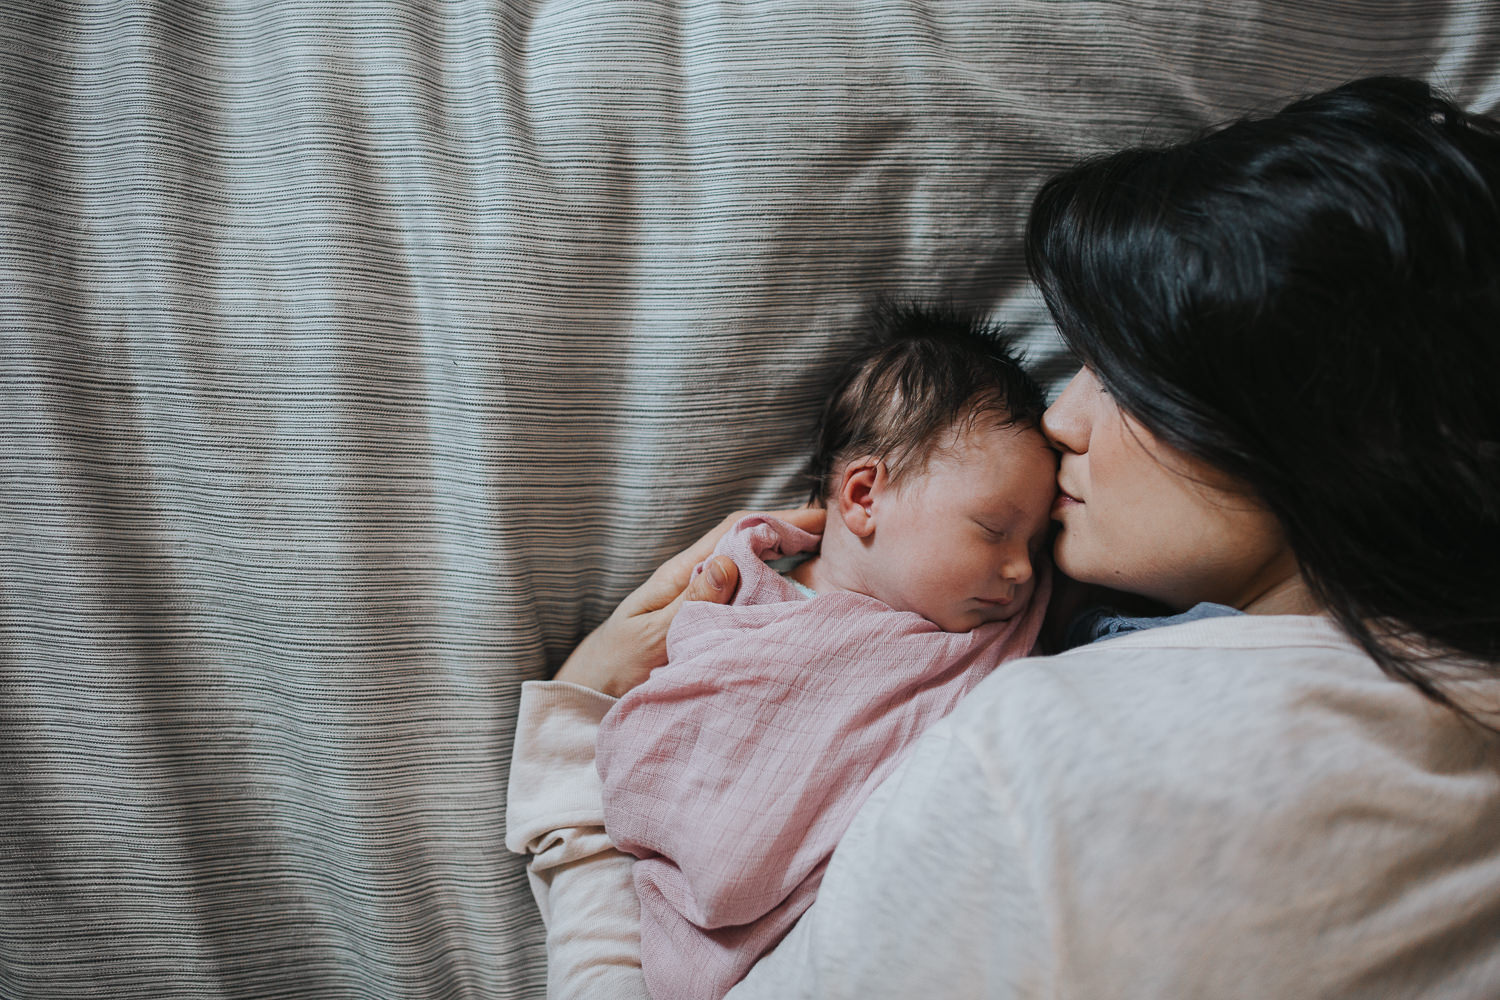 new mom snuggled face to face with 2 week old baby daughter - Barrie lifestyle photography